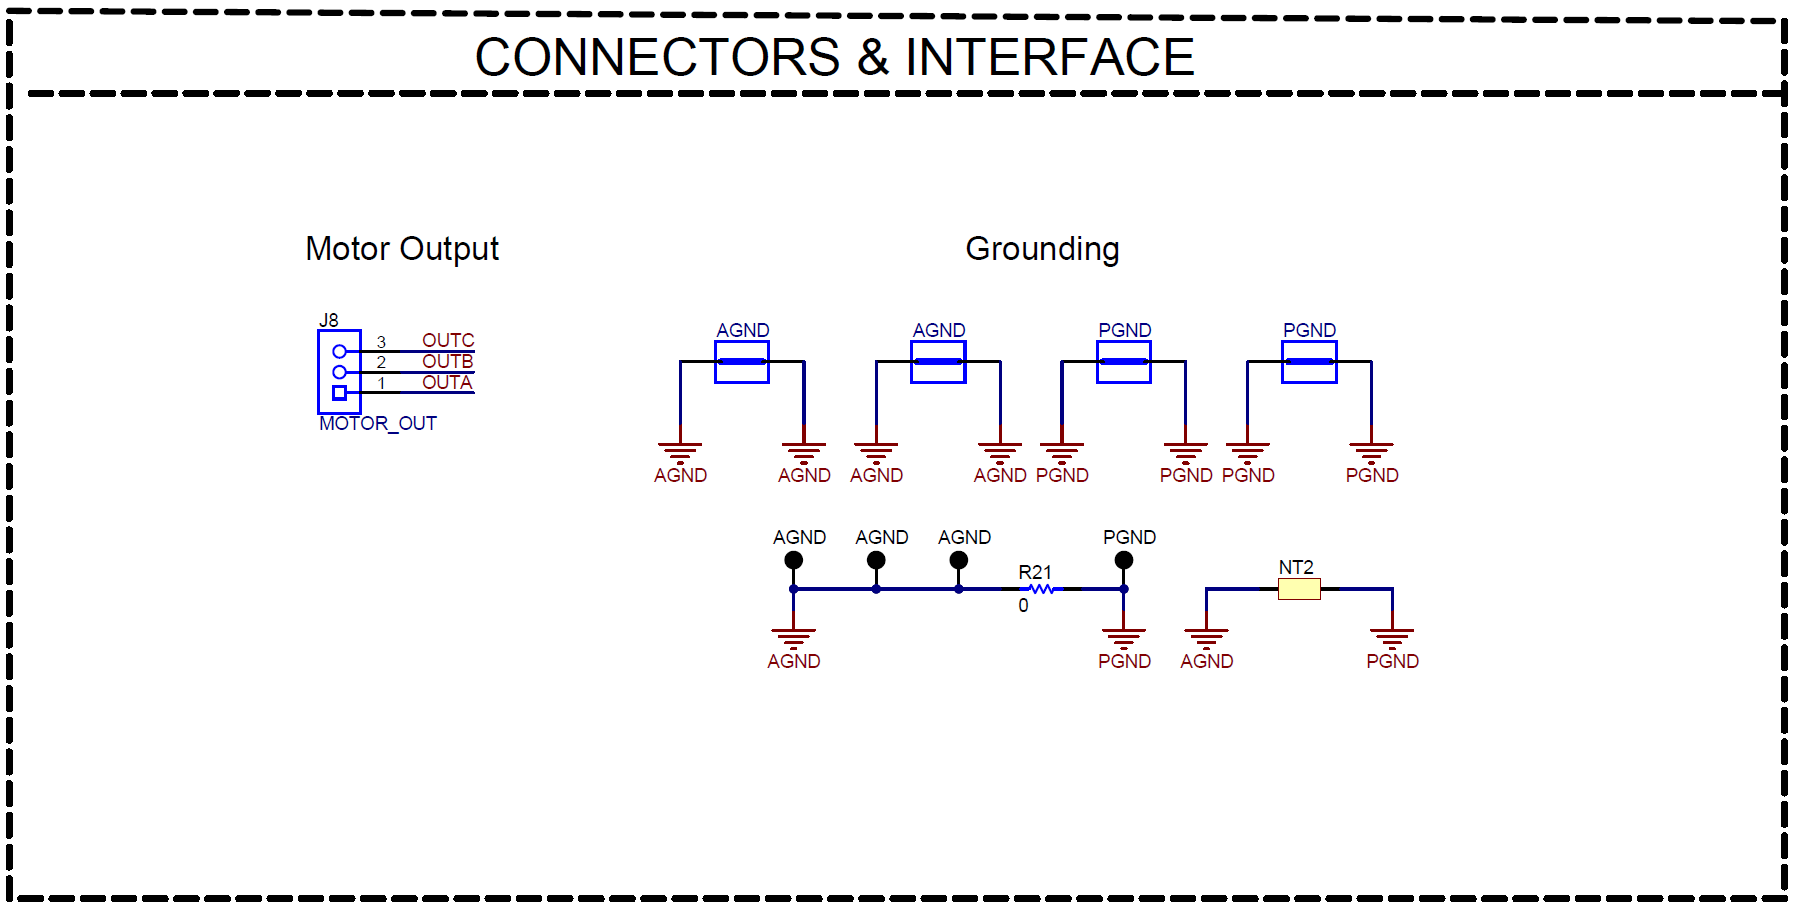 MCF8315PWPEVM Connectors and Interface Schematic